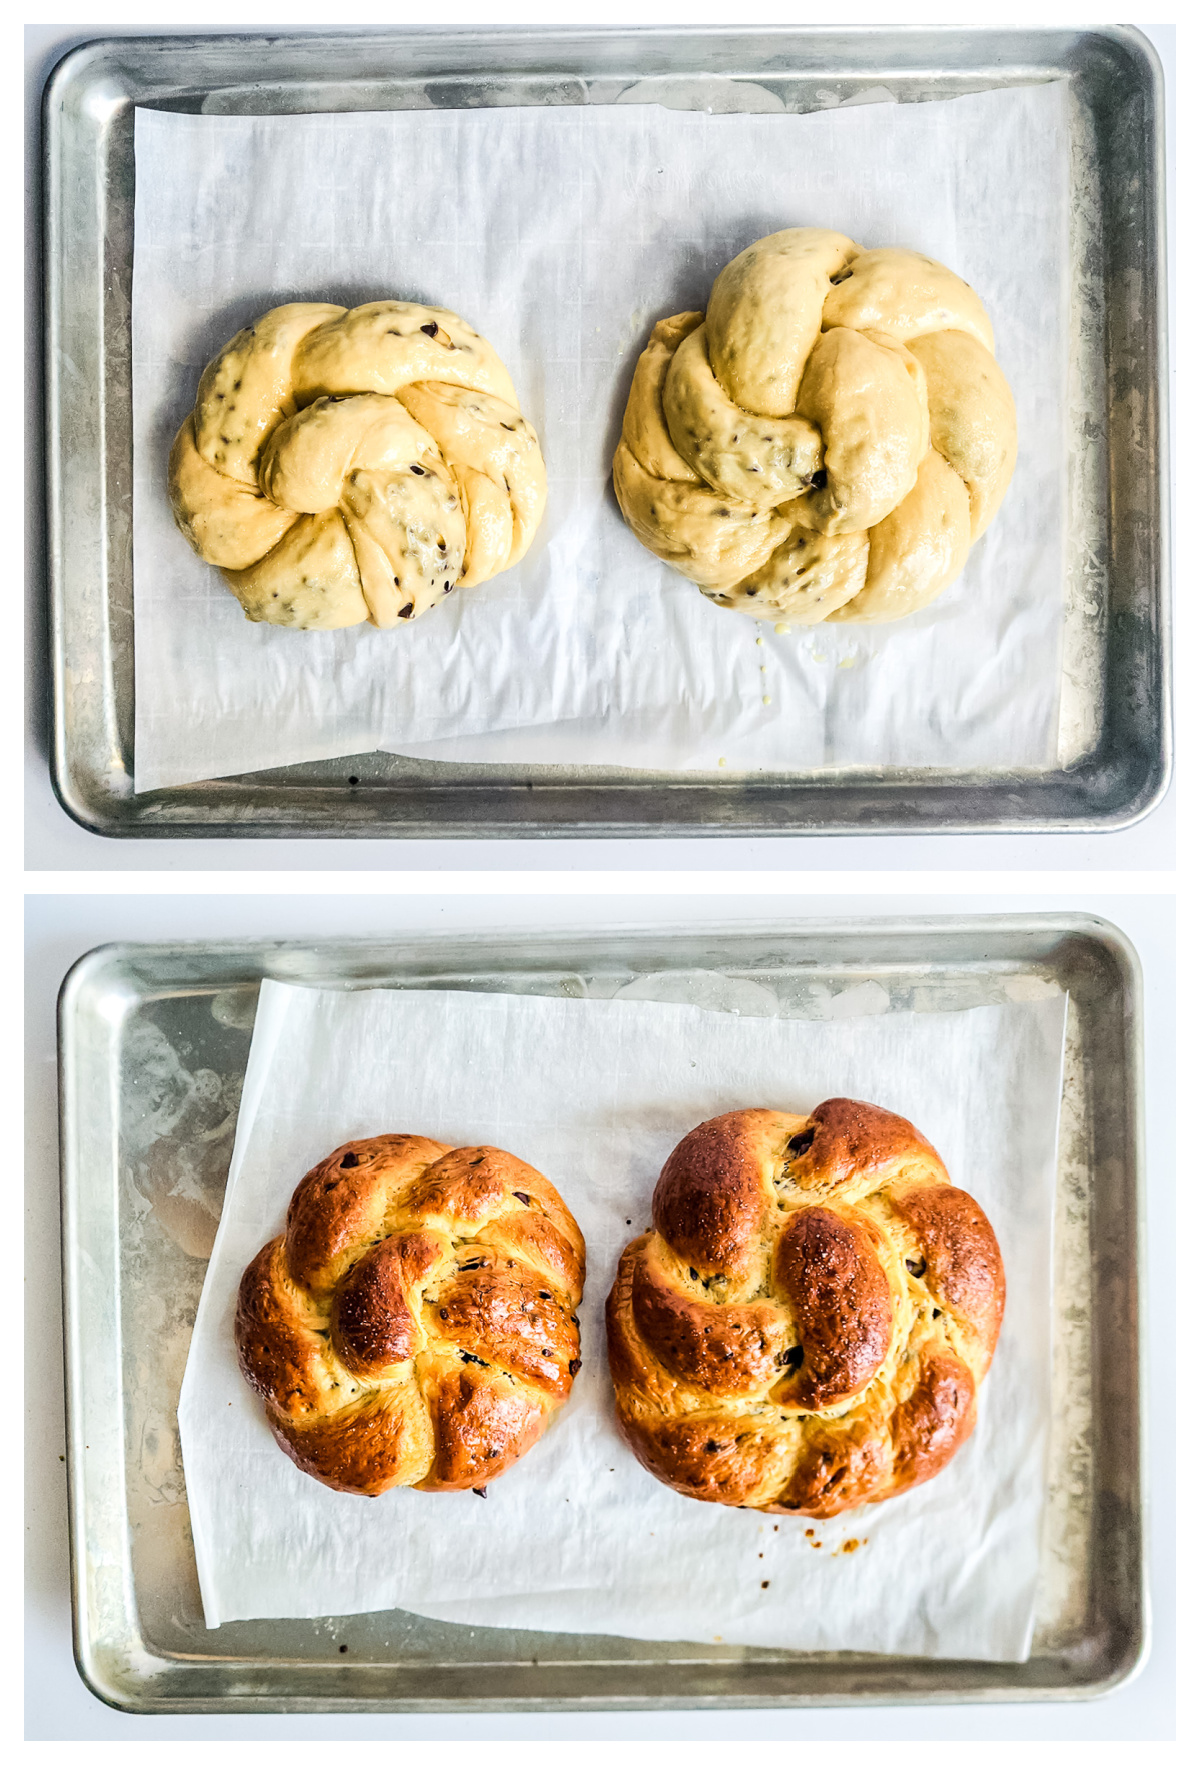 A comparison of what the brioche bread looks like before it is baked and after.